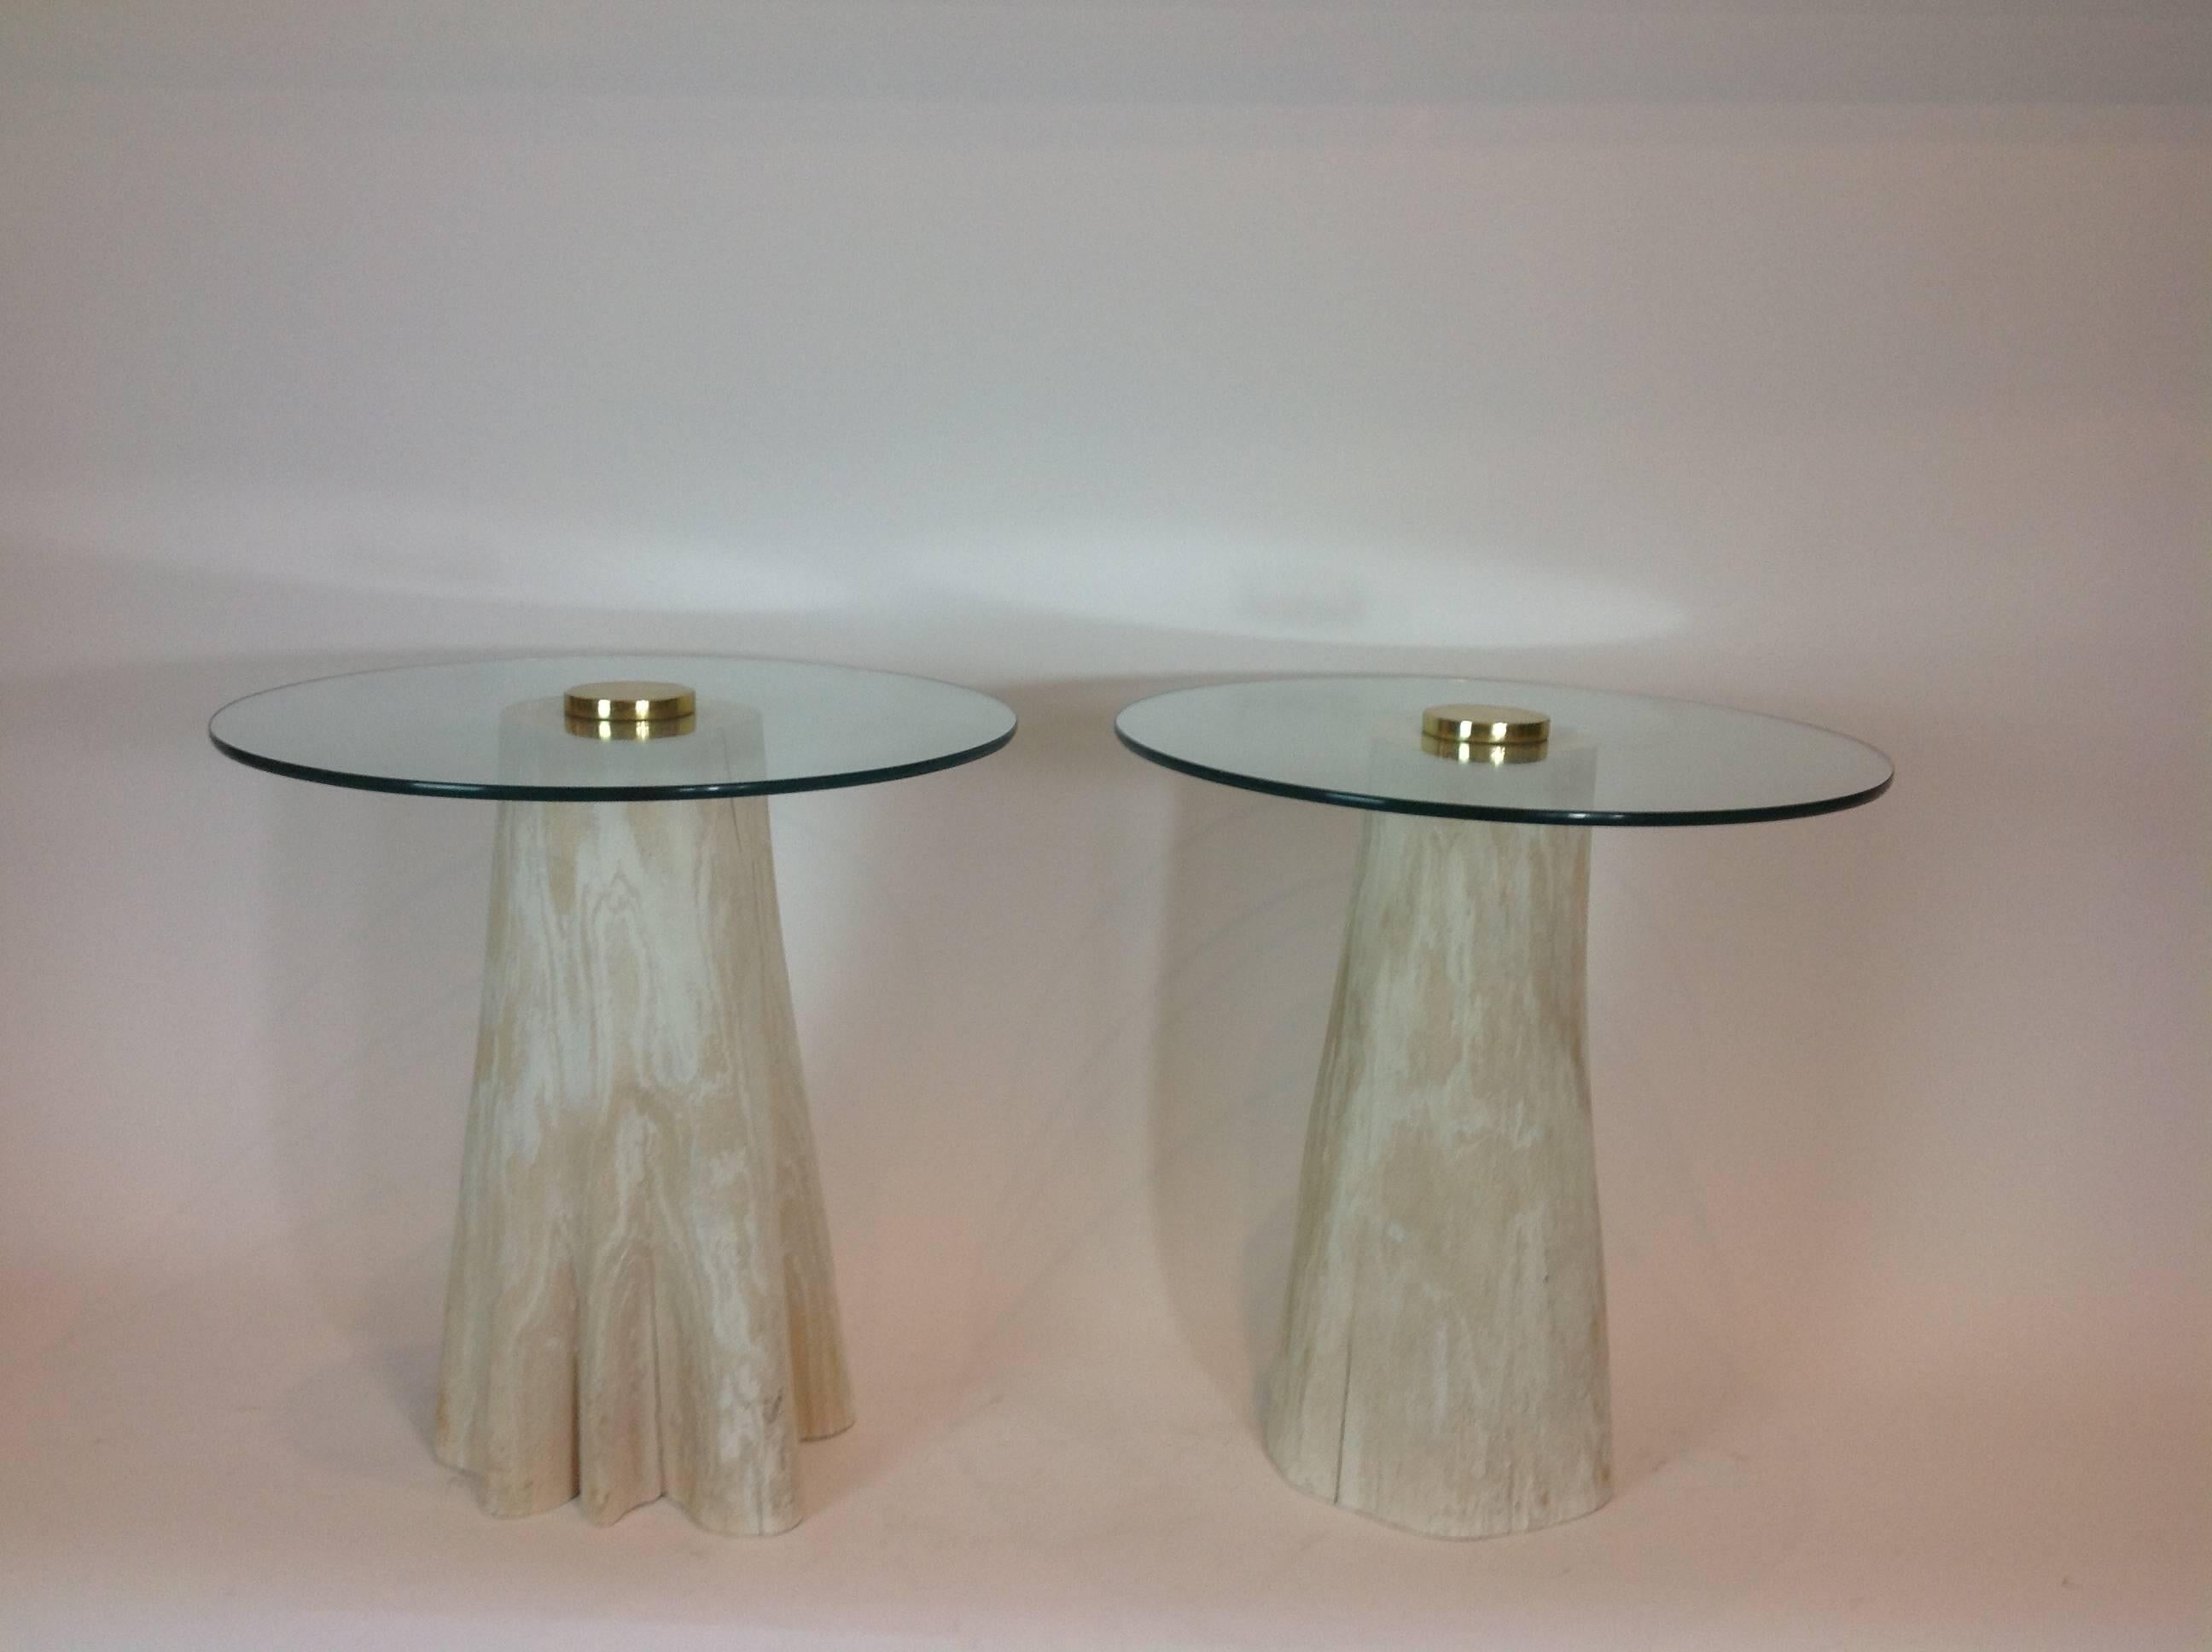 Wonderful pair of side tables made of natural cerused tree trunks with round glass tops with brass centre cap. Natural occurrence of separations in wood trunks.